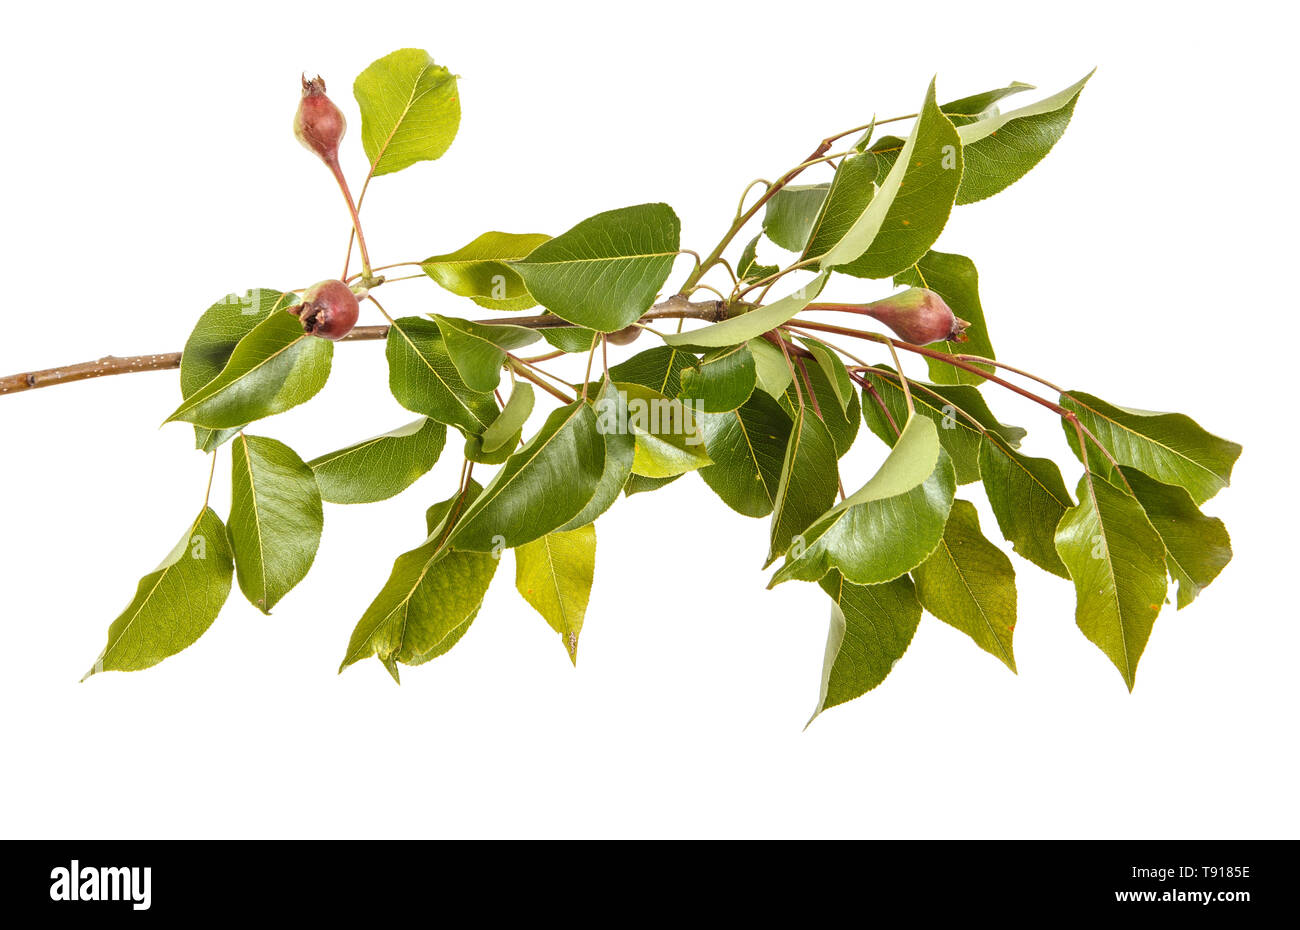 Branch of a grash tree with unripe fruit. Isolated on white Stock Photo